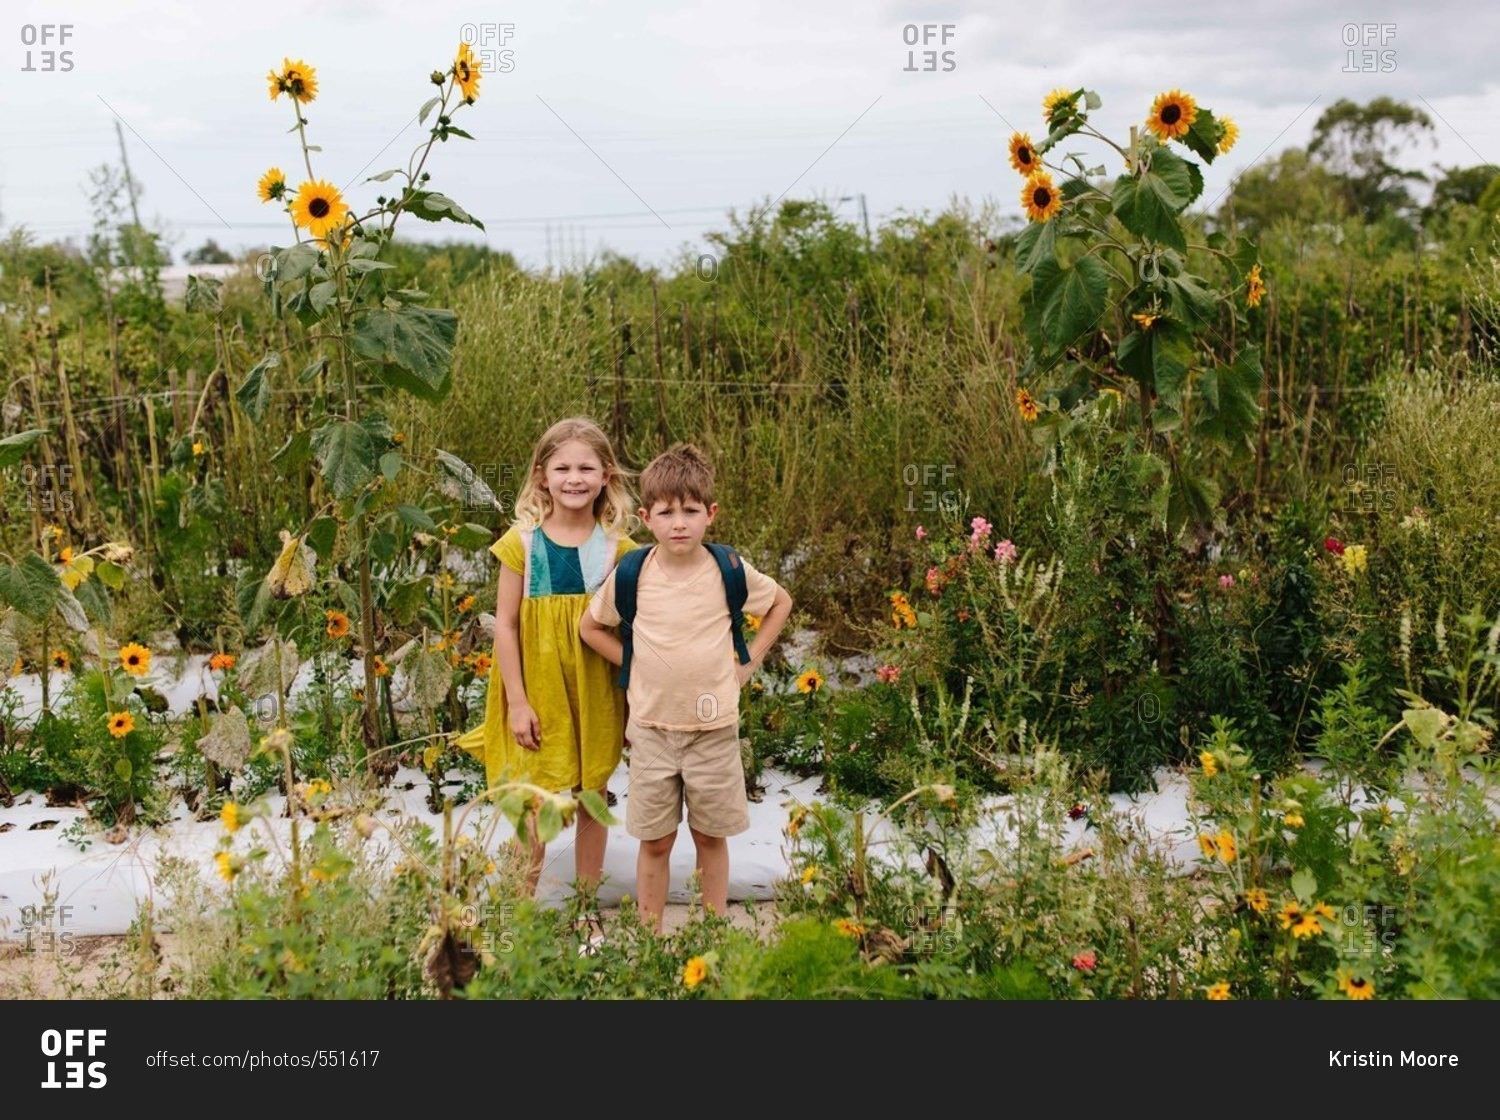 Two kids standing together in a flower garden